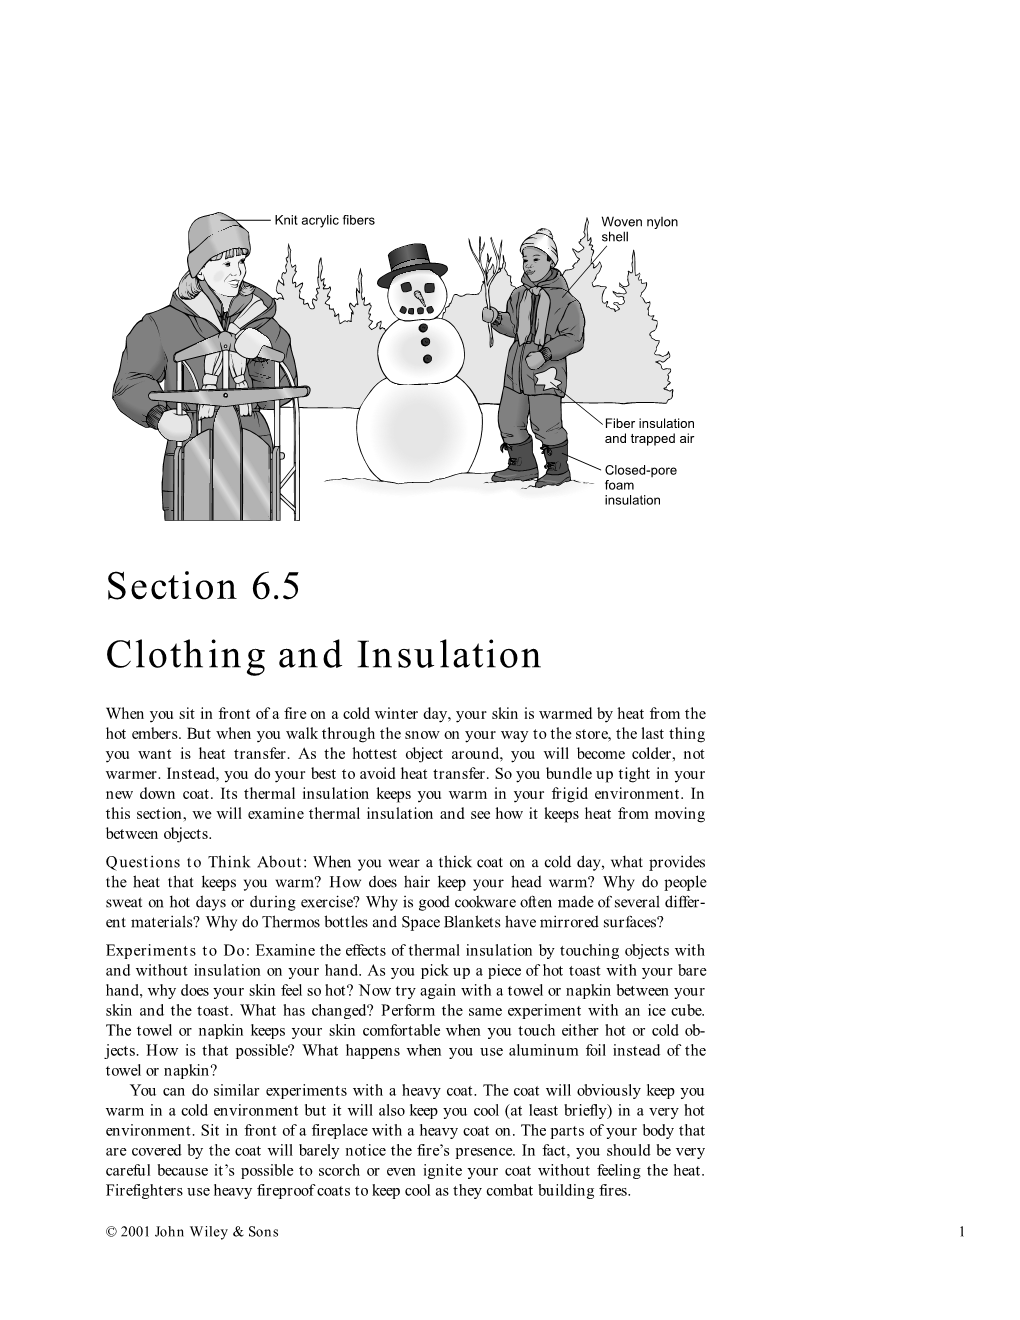 Section 6.5 Clothing and Insulation